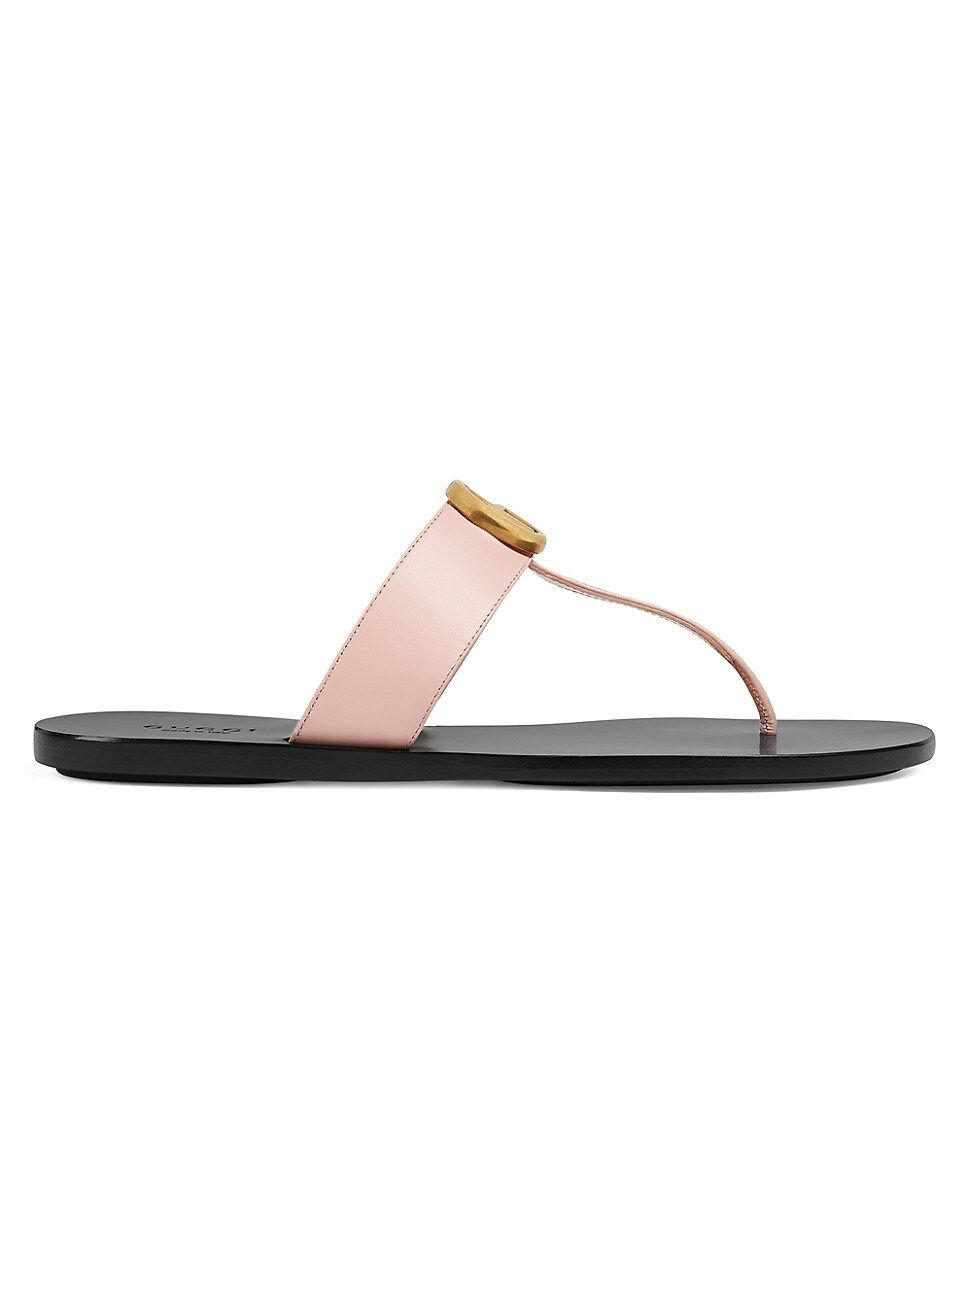 Gucci Women's Marmont Leather Thong Sandals With Double G - Perfect Pink - Size 7.5 | Saks Fifth Avenue